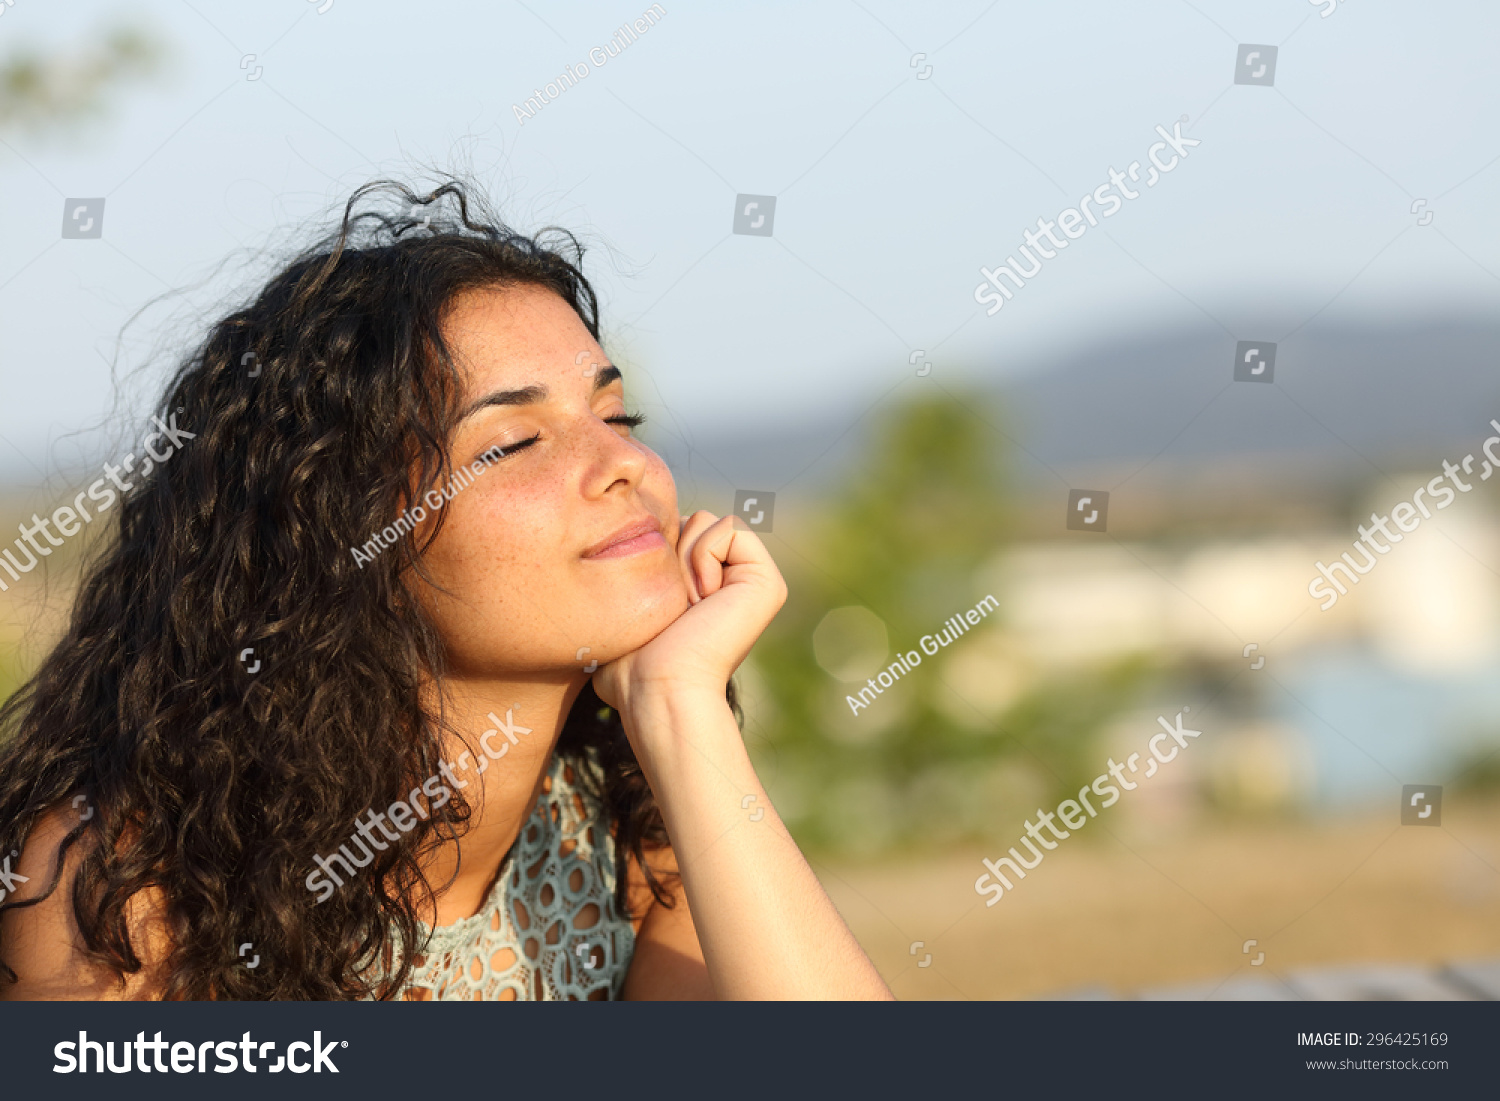 Woman relaxing and enjoying the sun in a warmth park at sunset #296425169